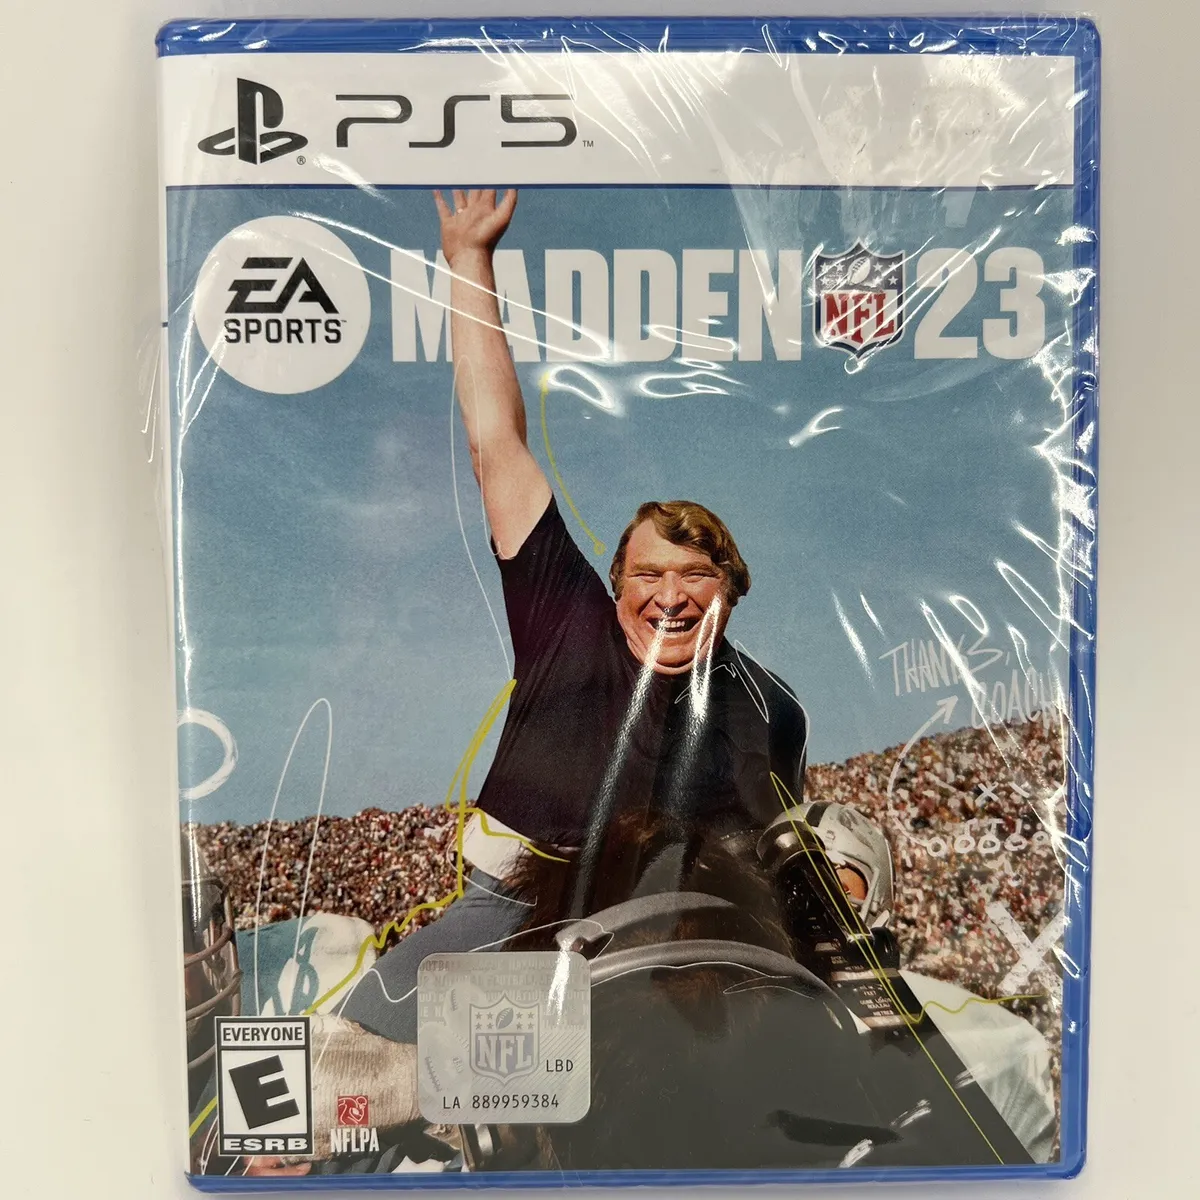 madden 23 ps5 game